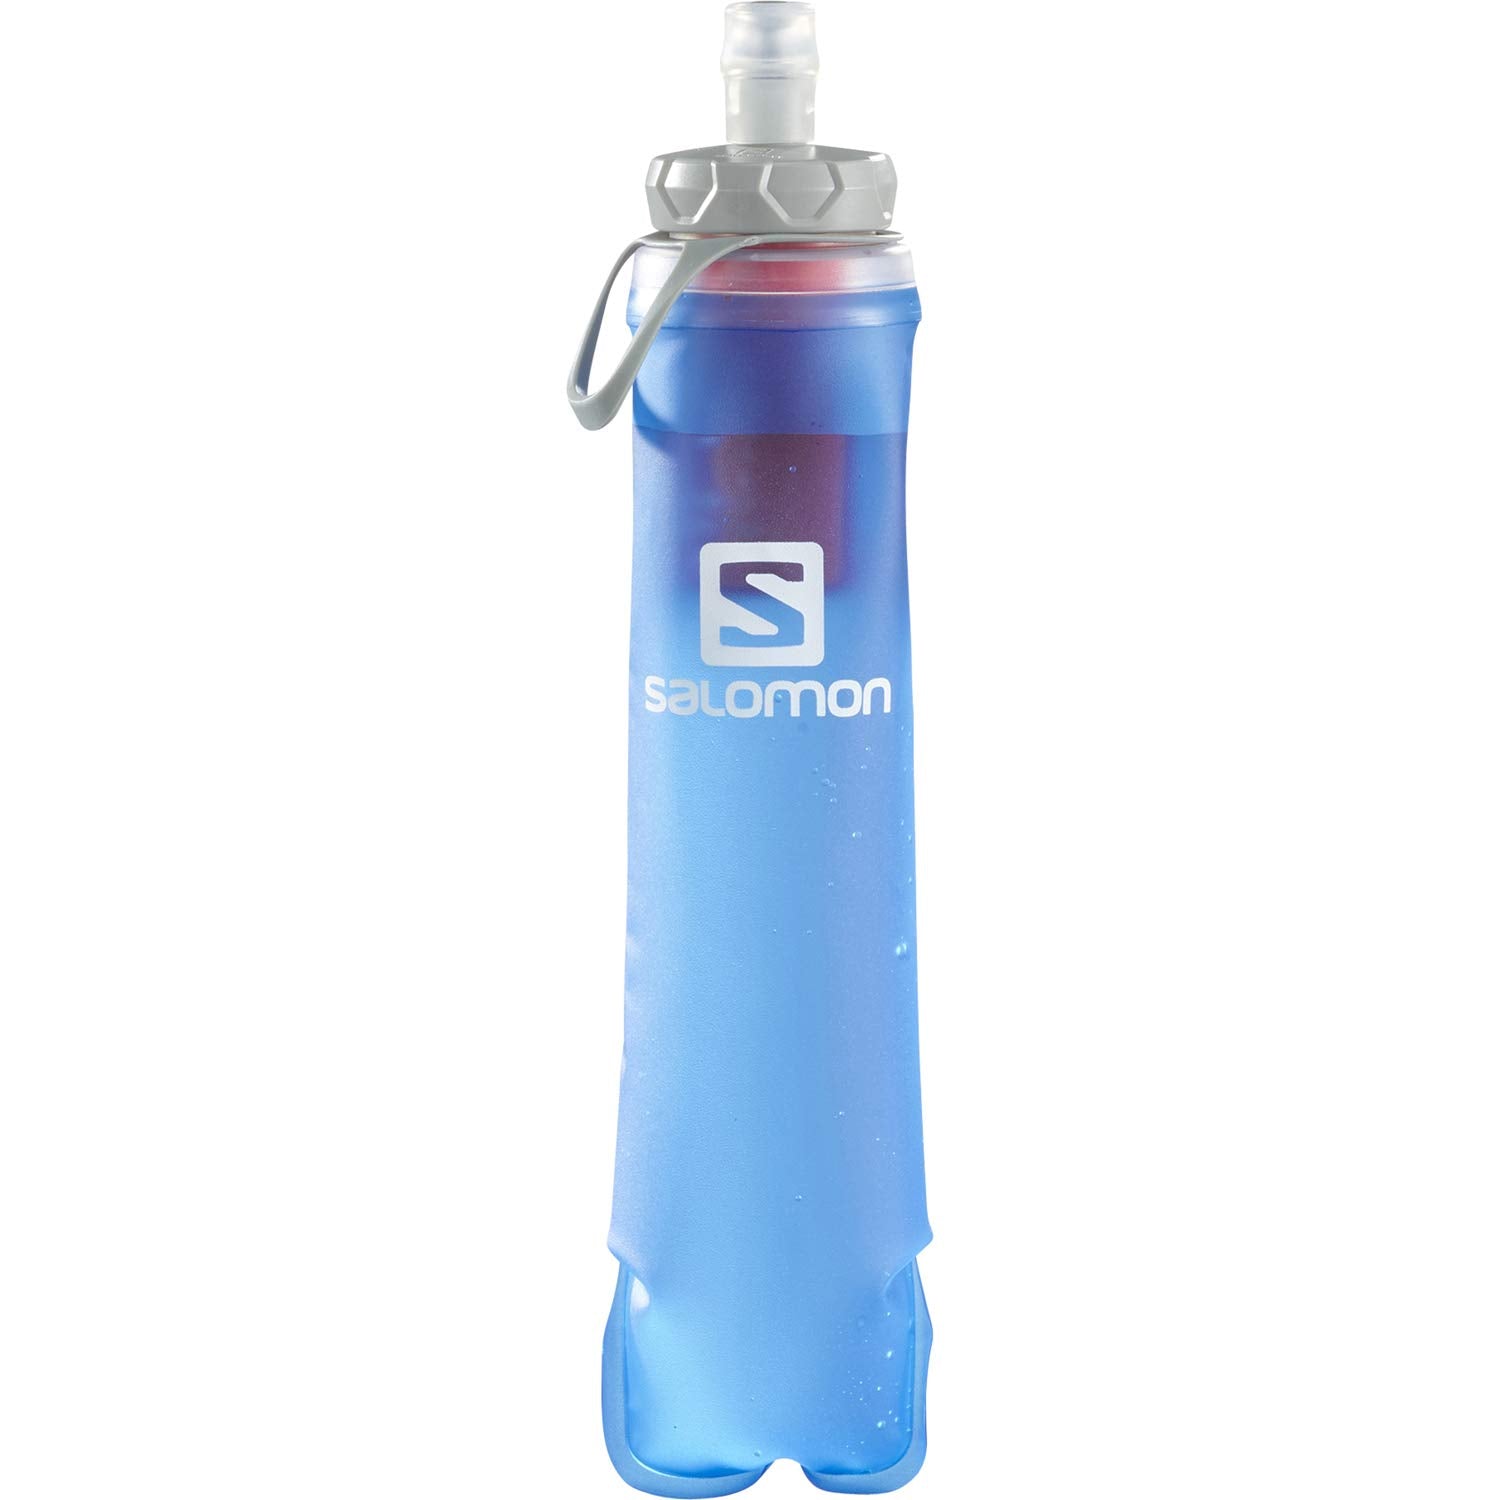 Salomon Soft Flask XA Filter 490 ml Filters Bacteria Protozoa From Natural Water Sources